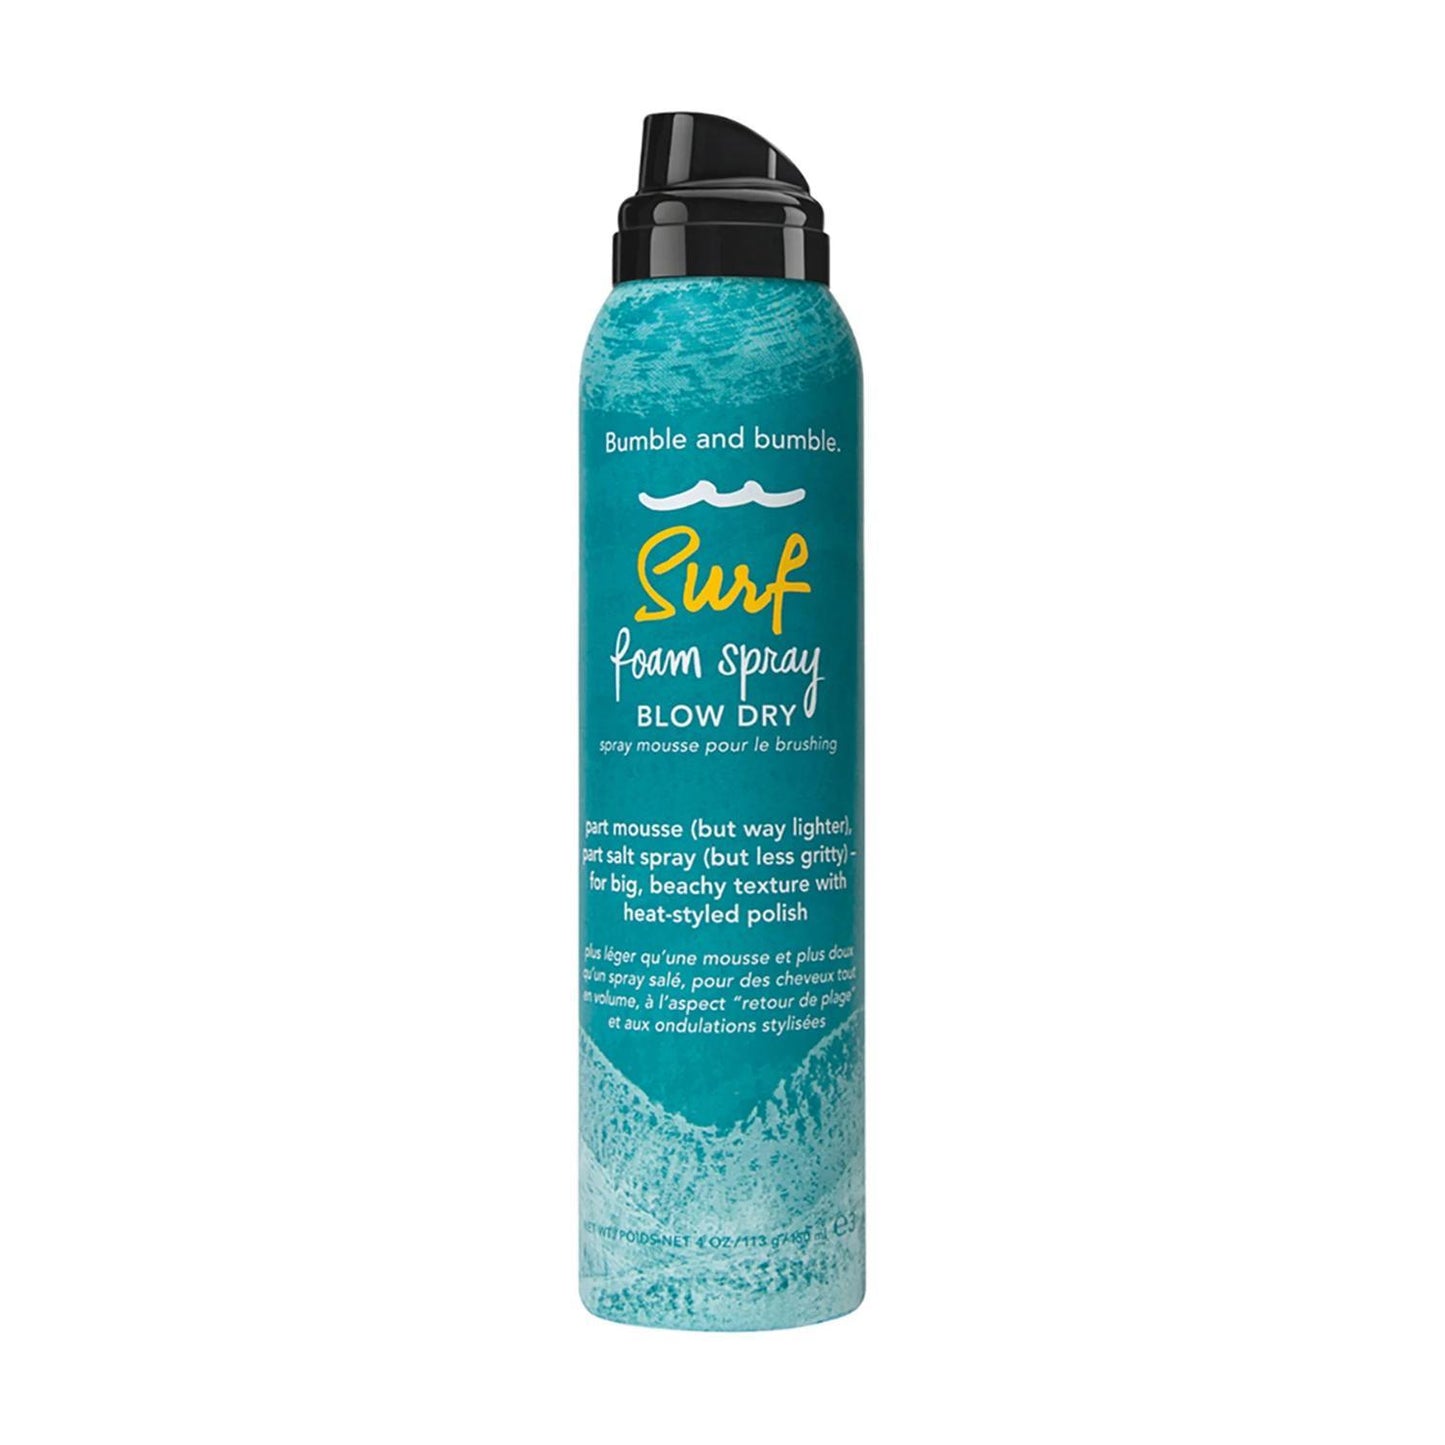 Bumble And Bumble Surf Foam Spray Blow Dry 150 Ml